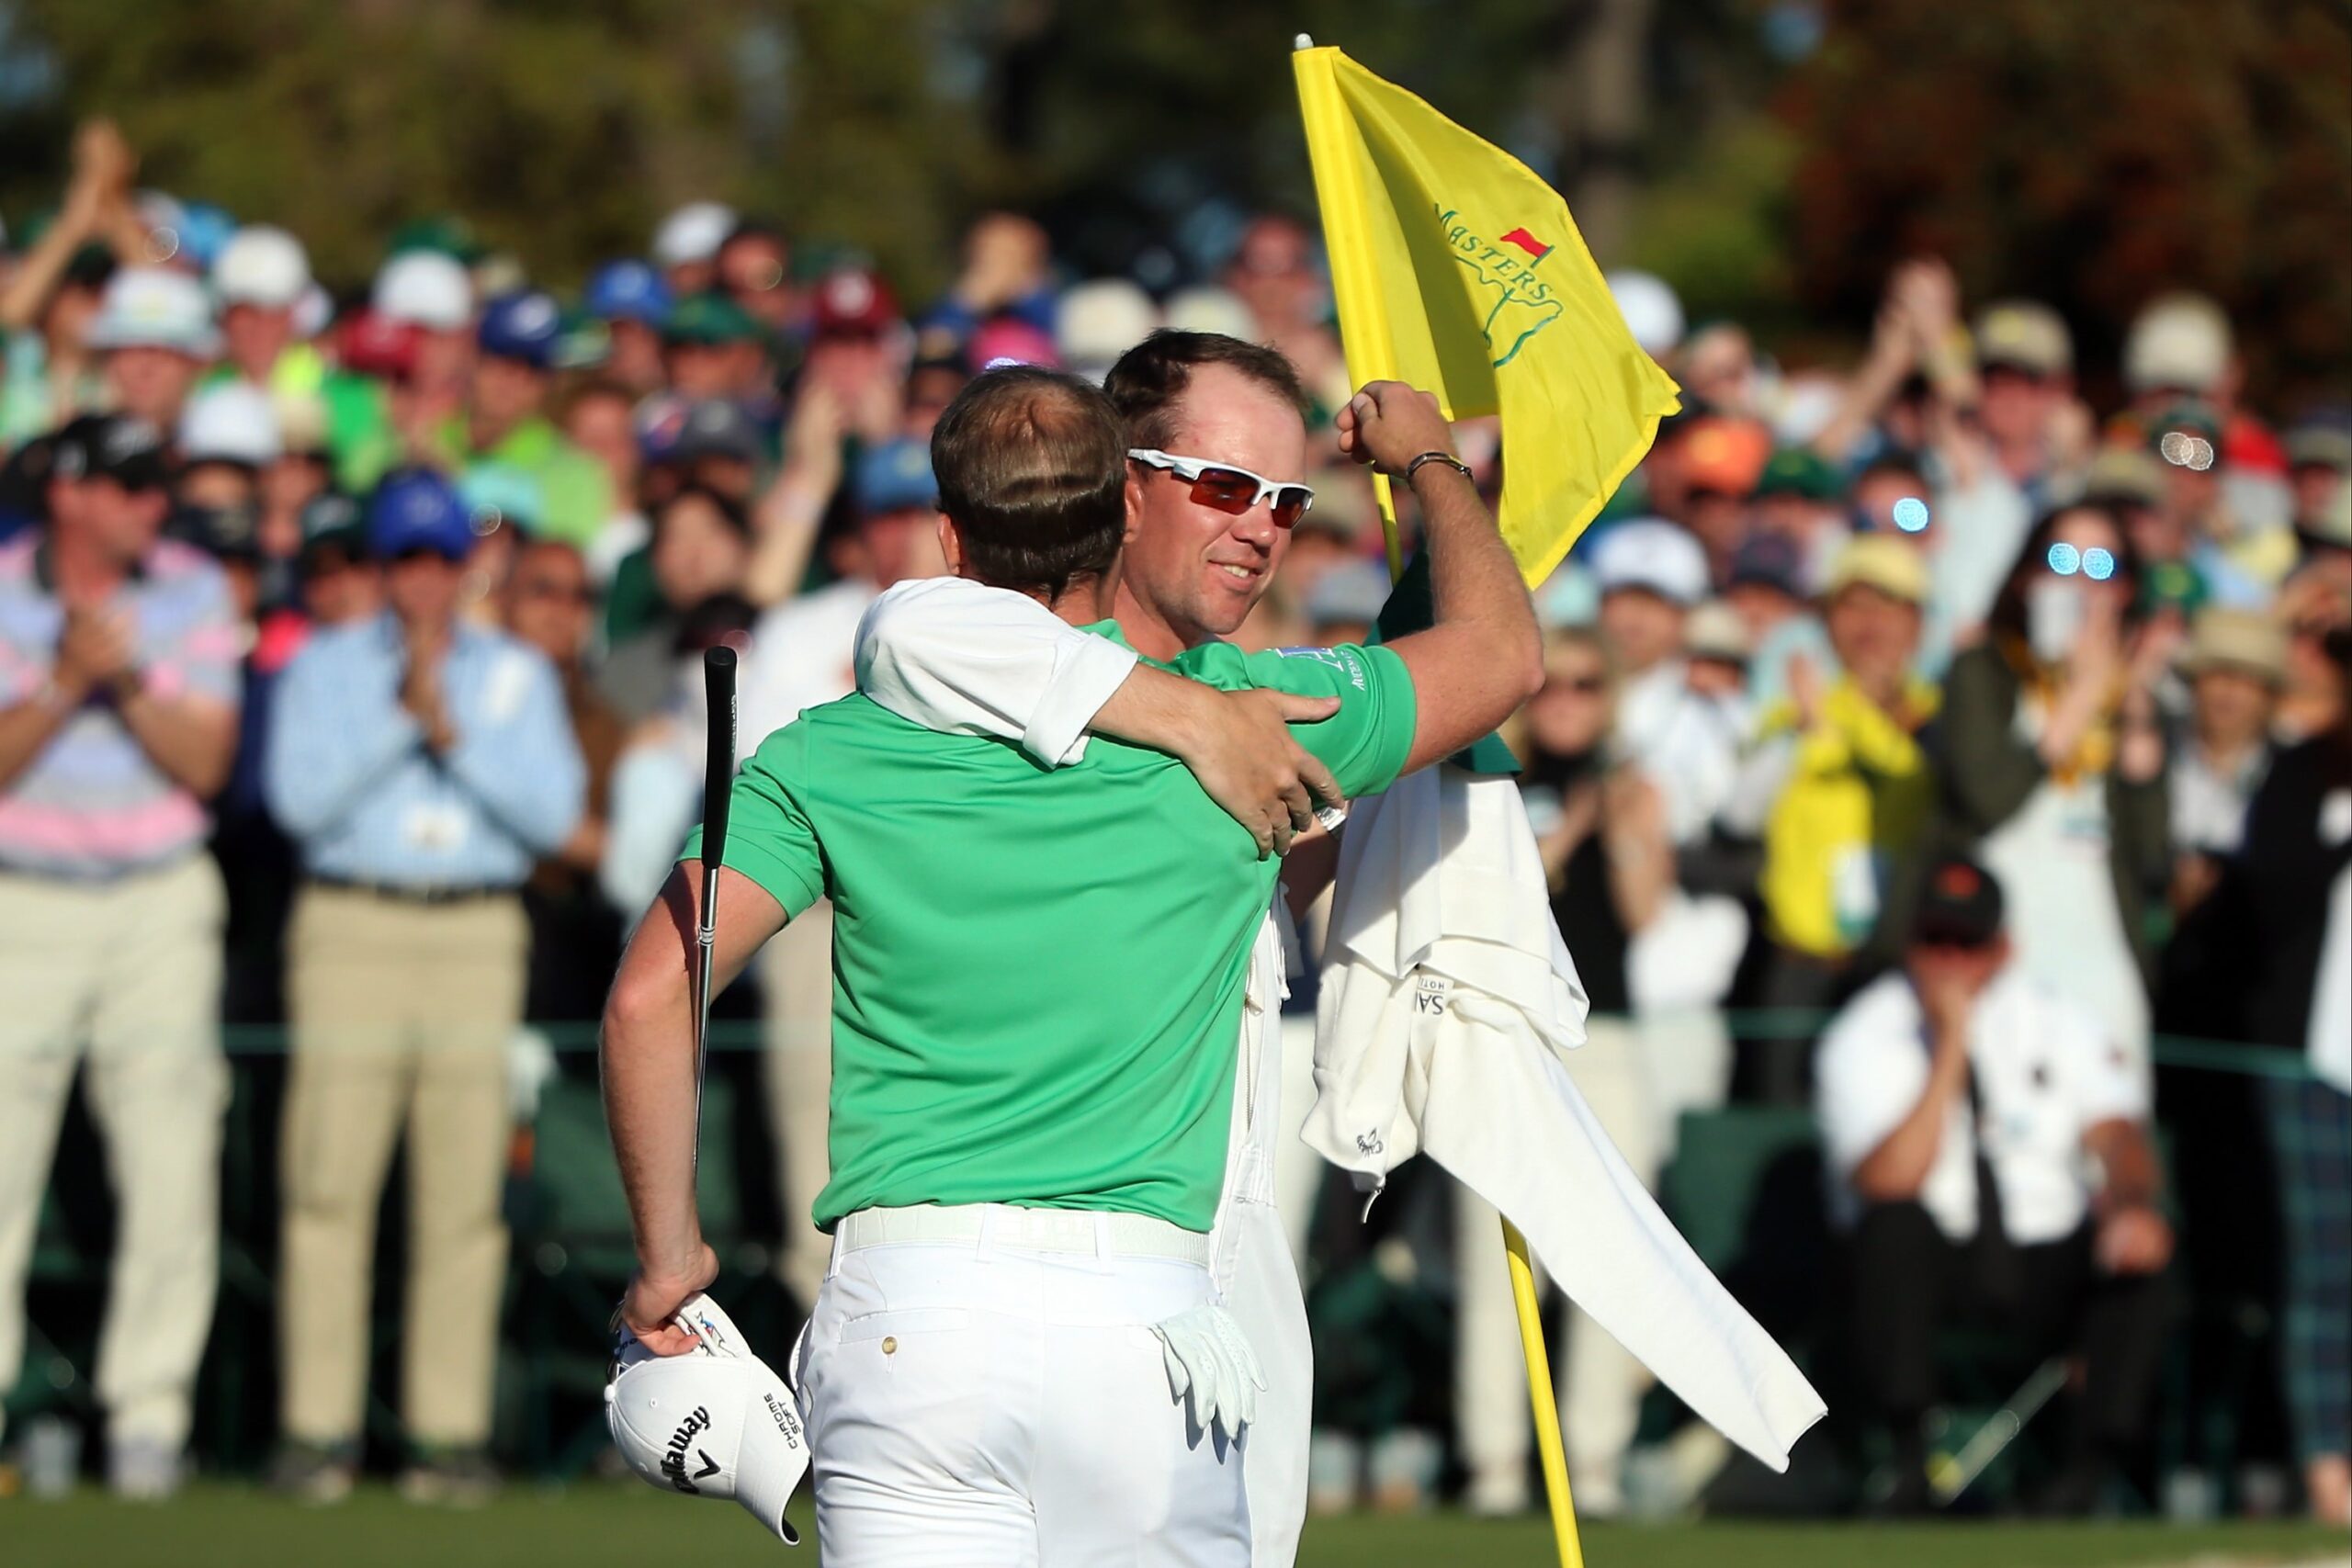 Caddies are weird: My ode to the humble bagman